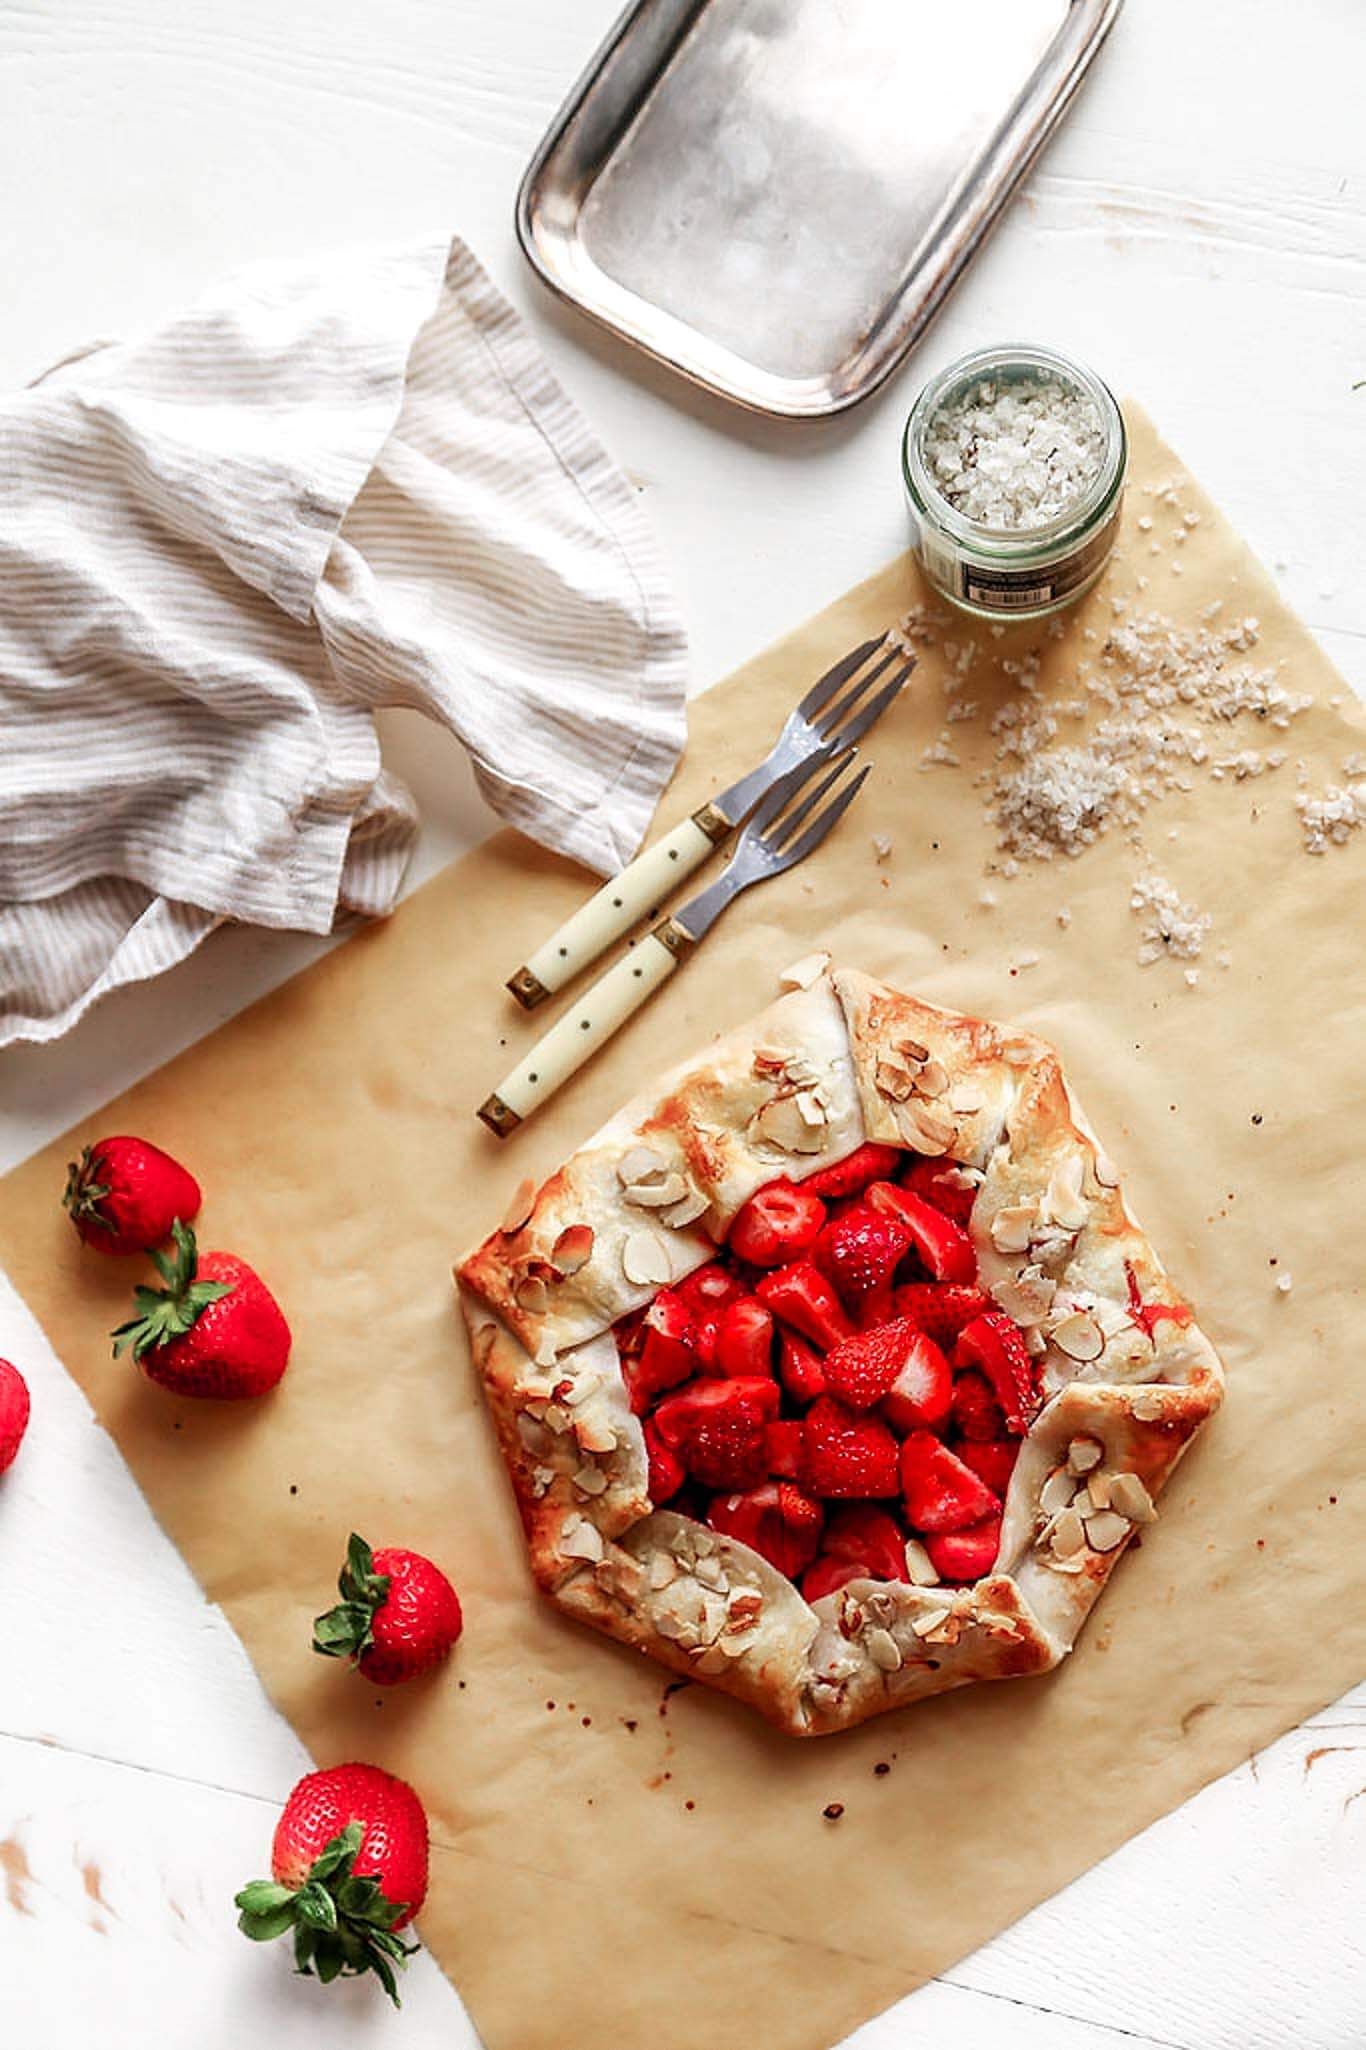 This rustic Strawberry Galette is a quick and easy dessert recipe that can be assembled in just 10 minutes using store-bought, refrigerated pie crust. | platingsandpairings.com